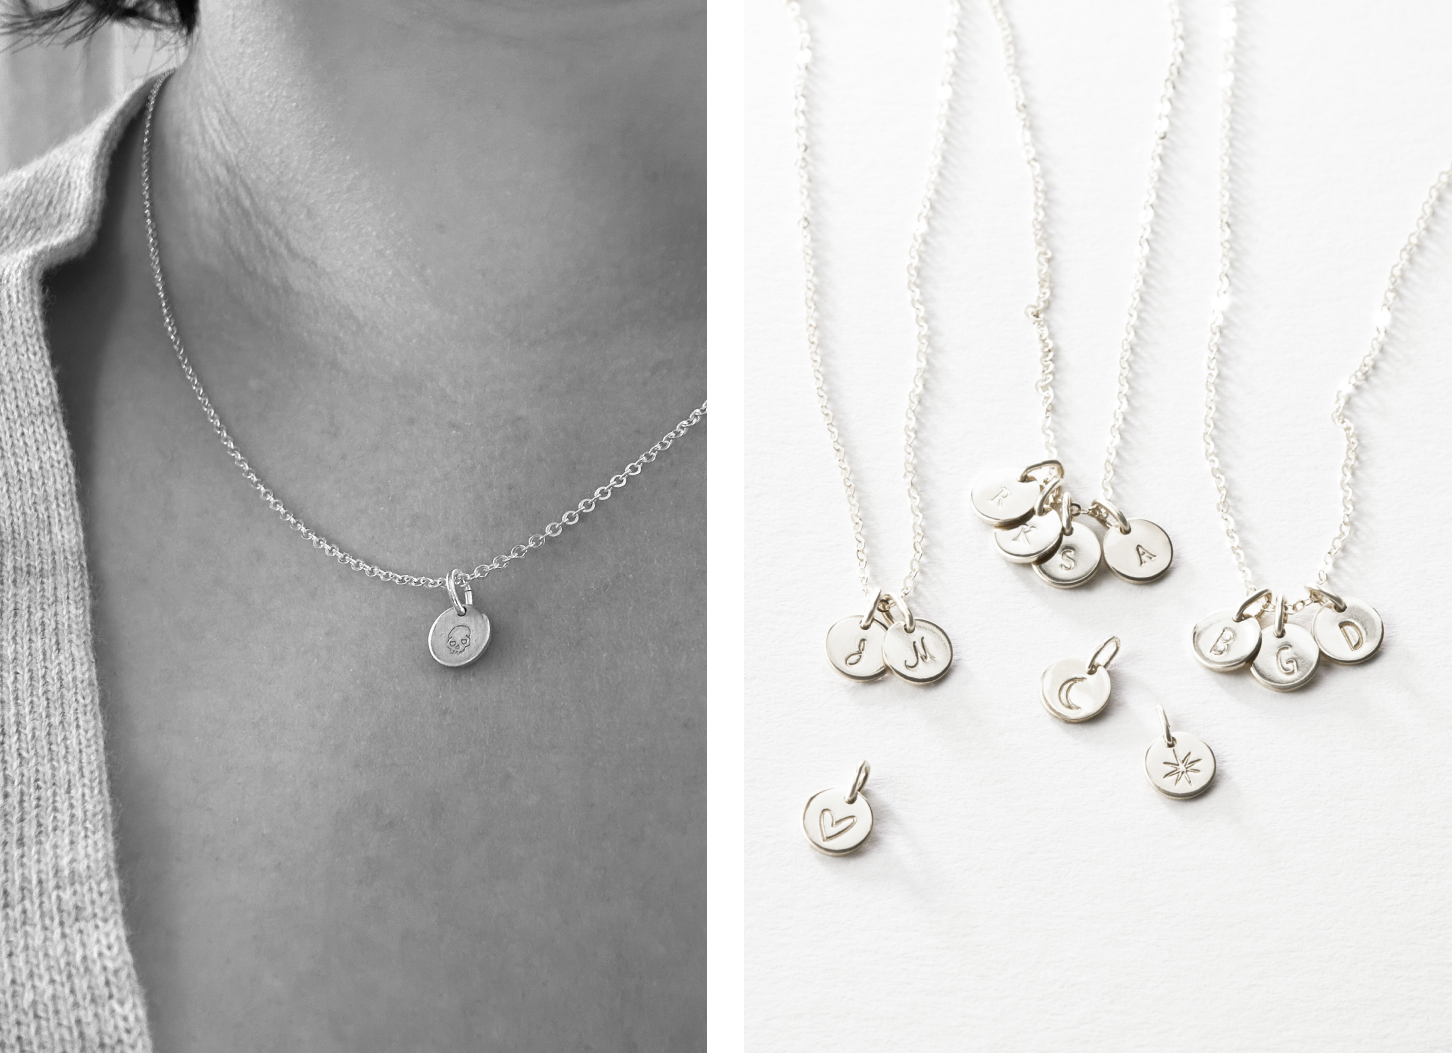 Personalized Yue Necklace